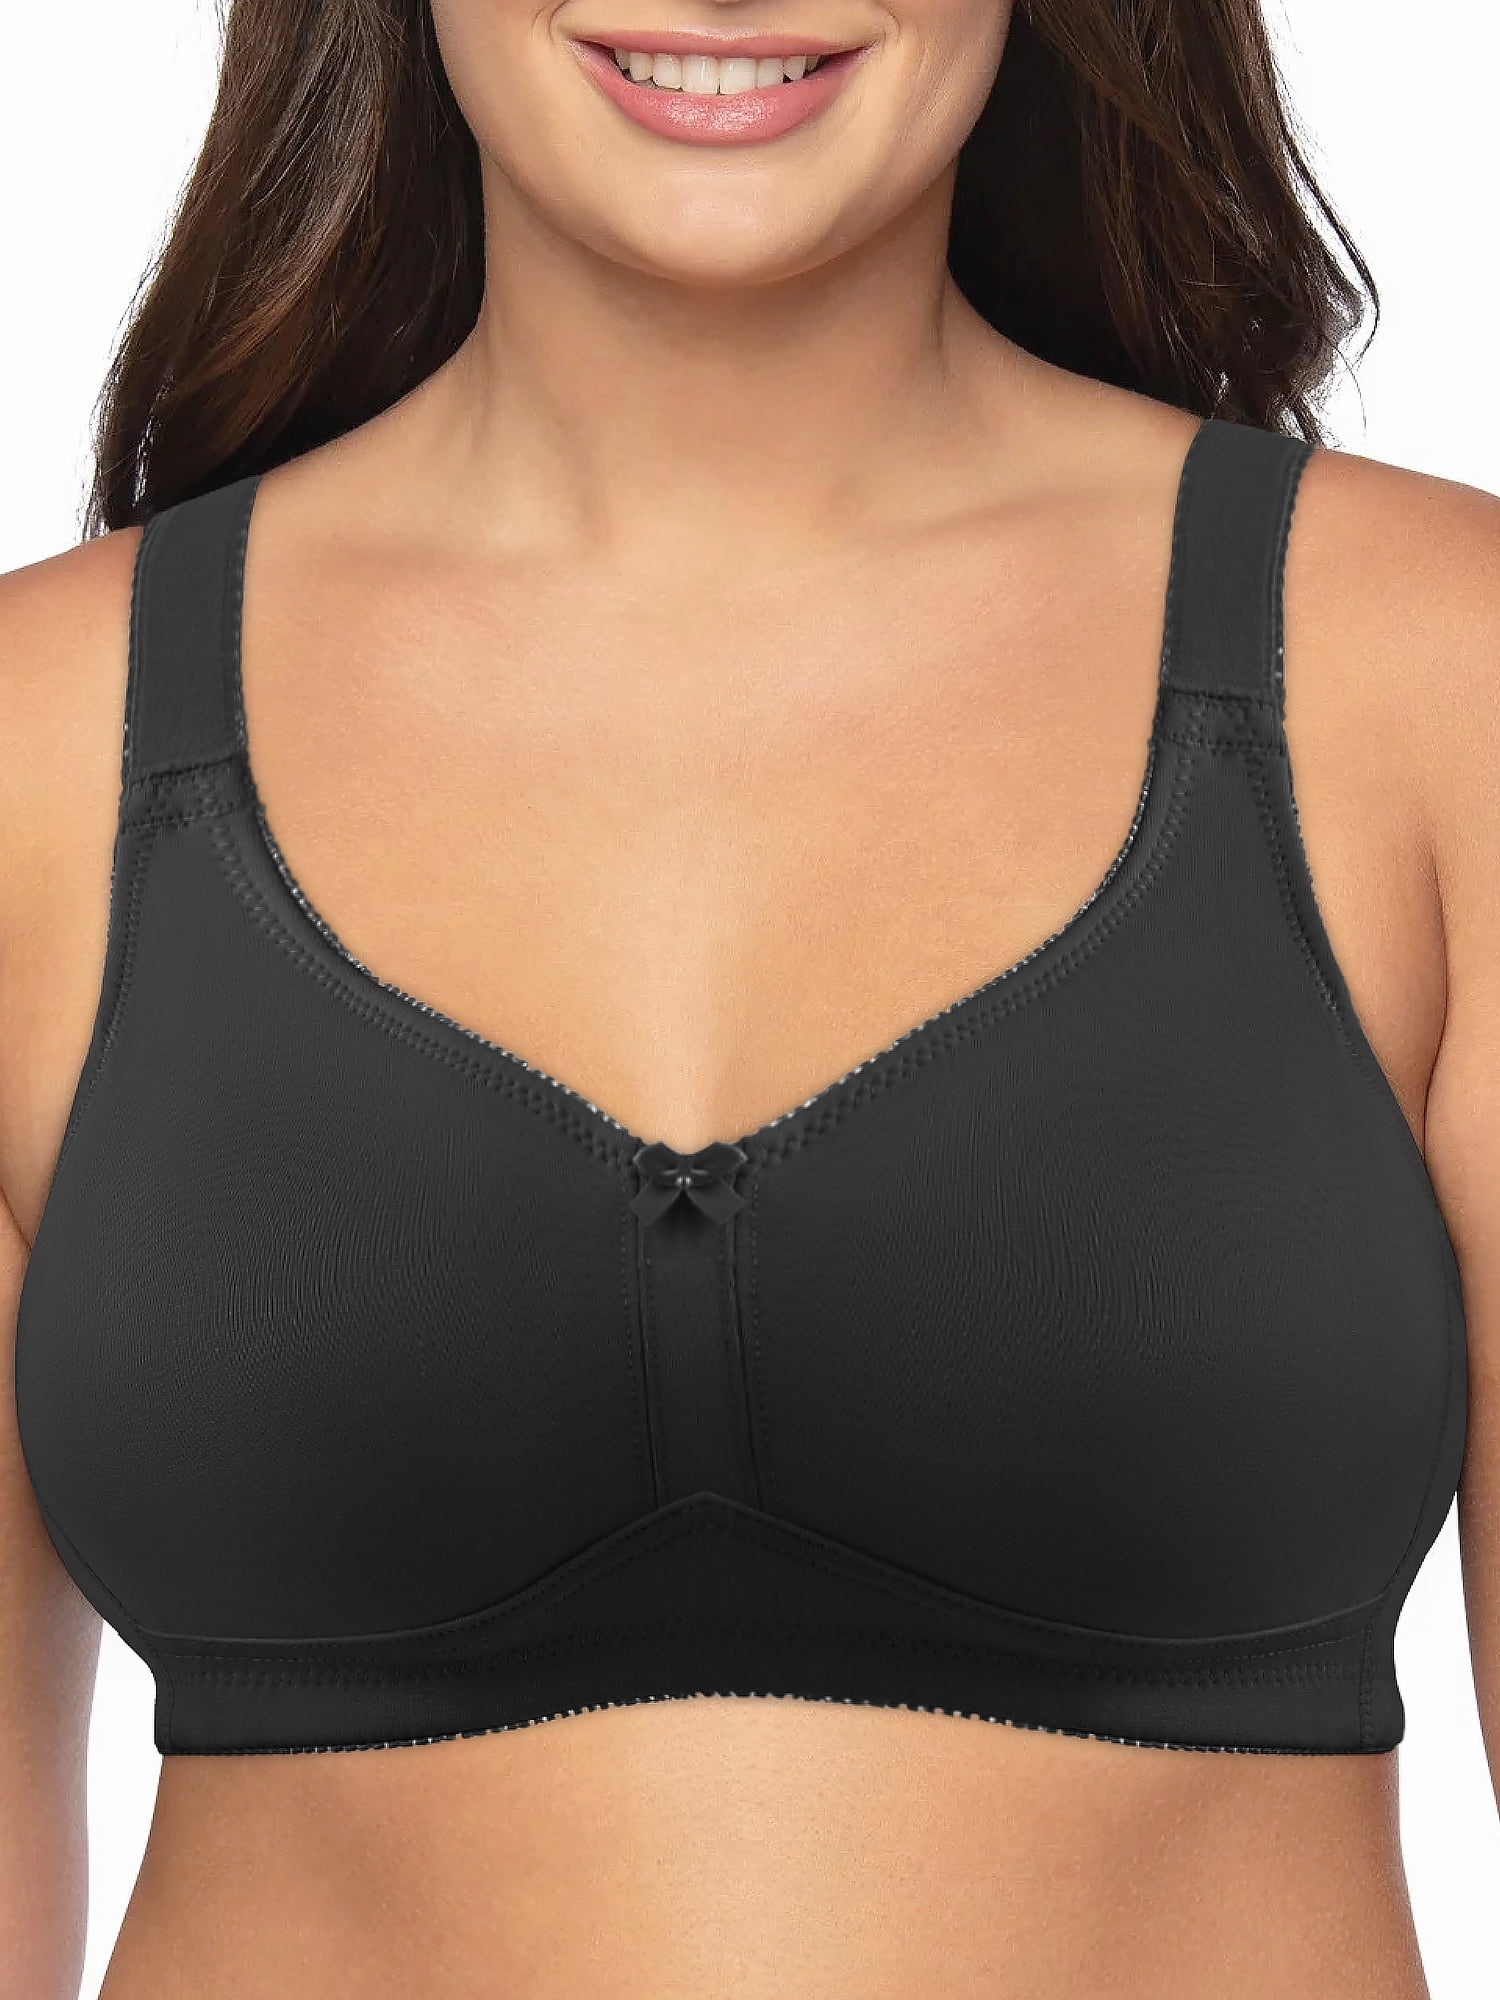 AILIVIN Wireless Bras For Women Comfort Surgery Bra With Adjustable Straps  Great Support Comfort Women Bras No Wire Bras Lift Up Bras Full Coverage